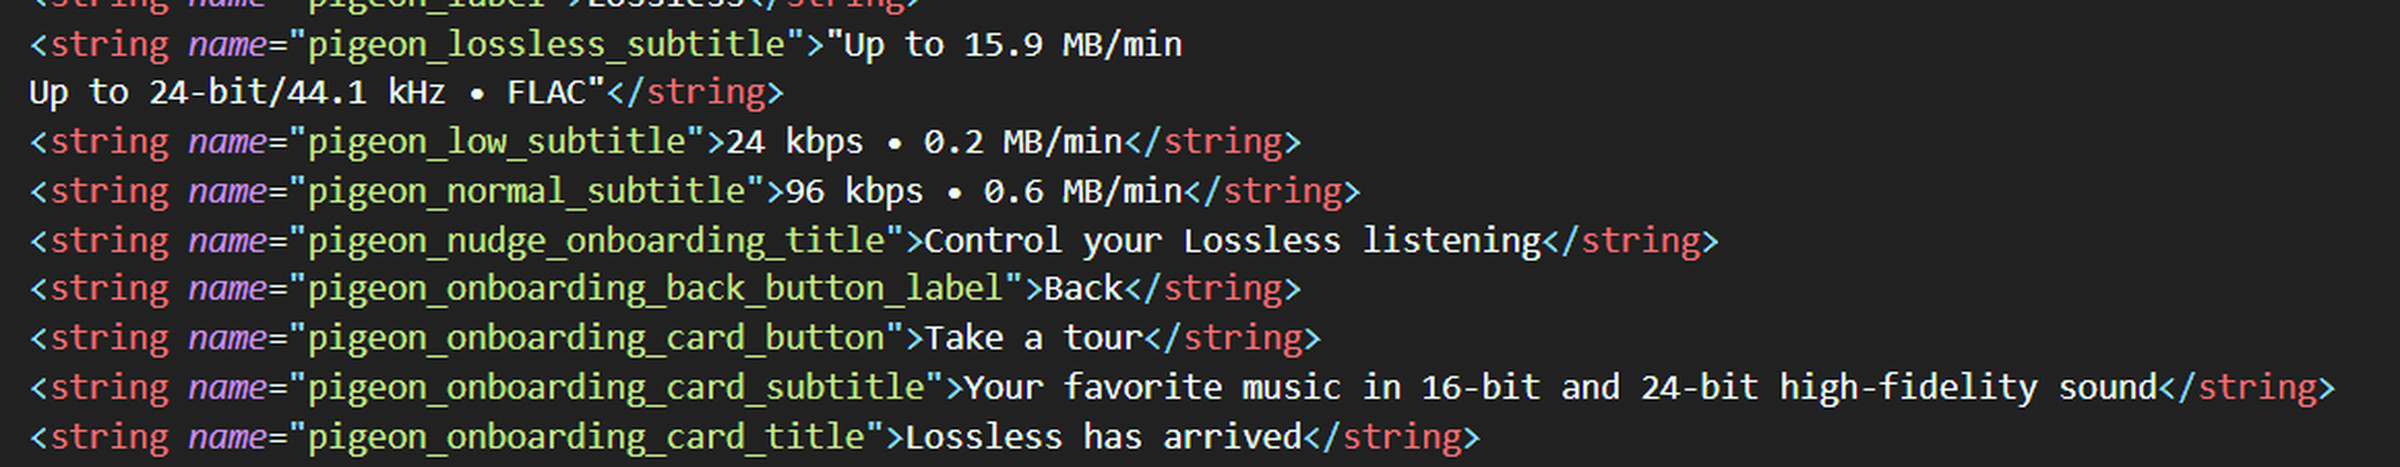 A screenshot of app code text that mentions lossless audio on Spotify.